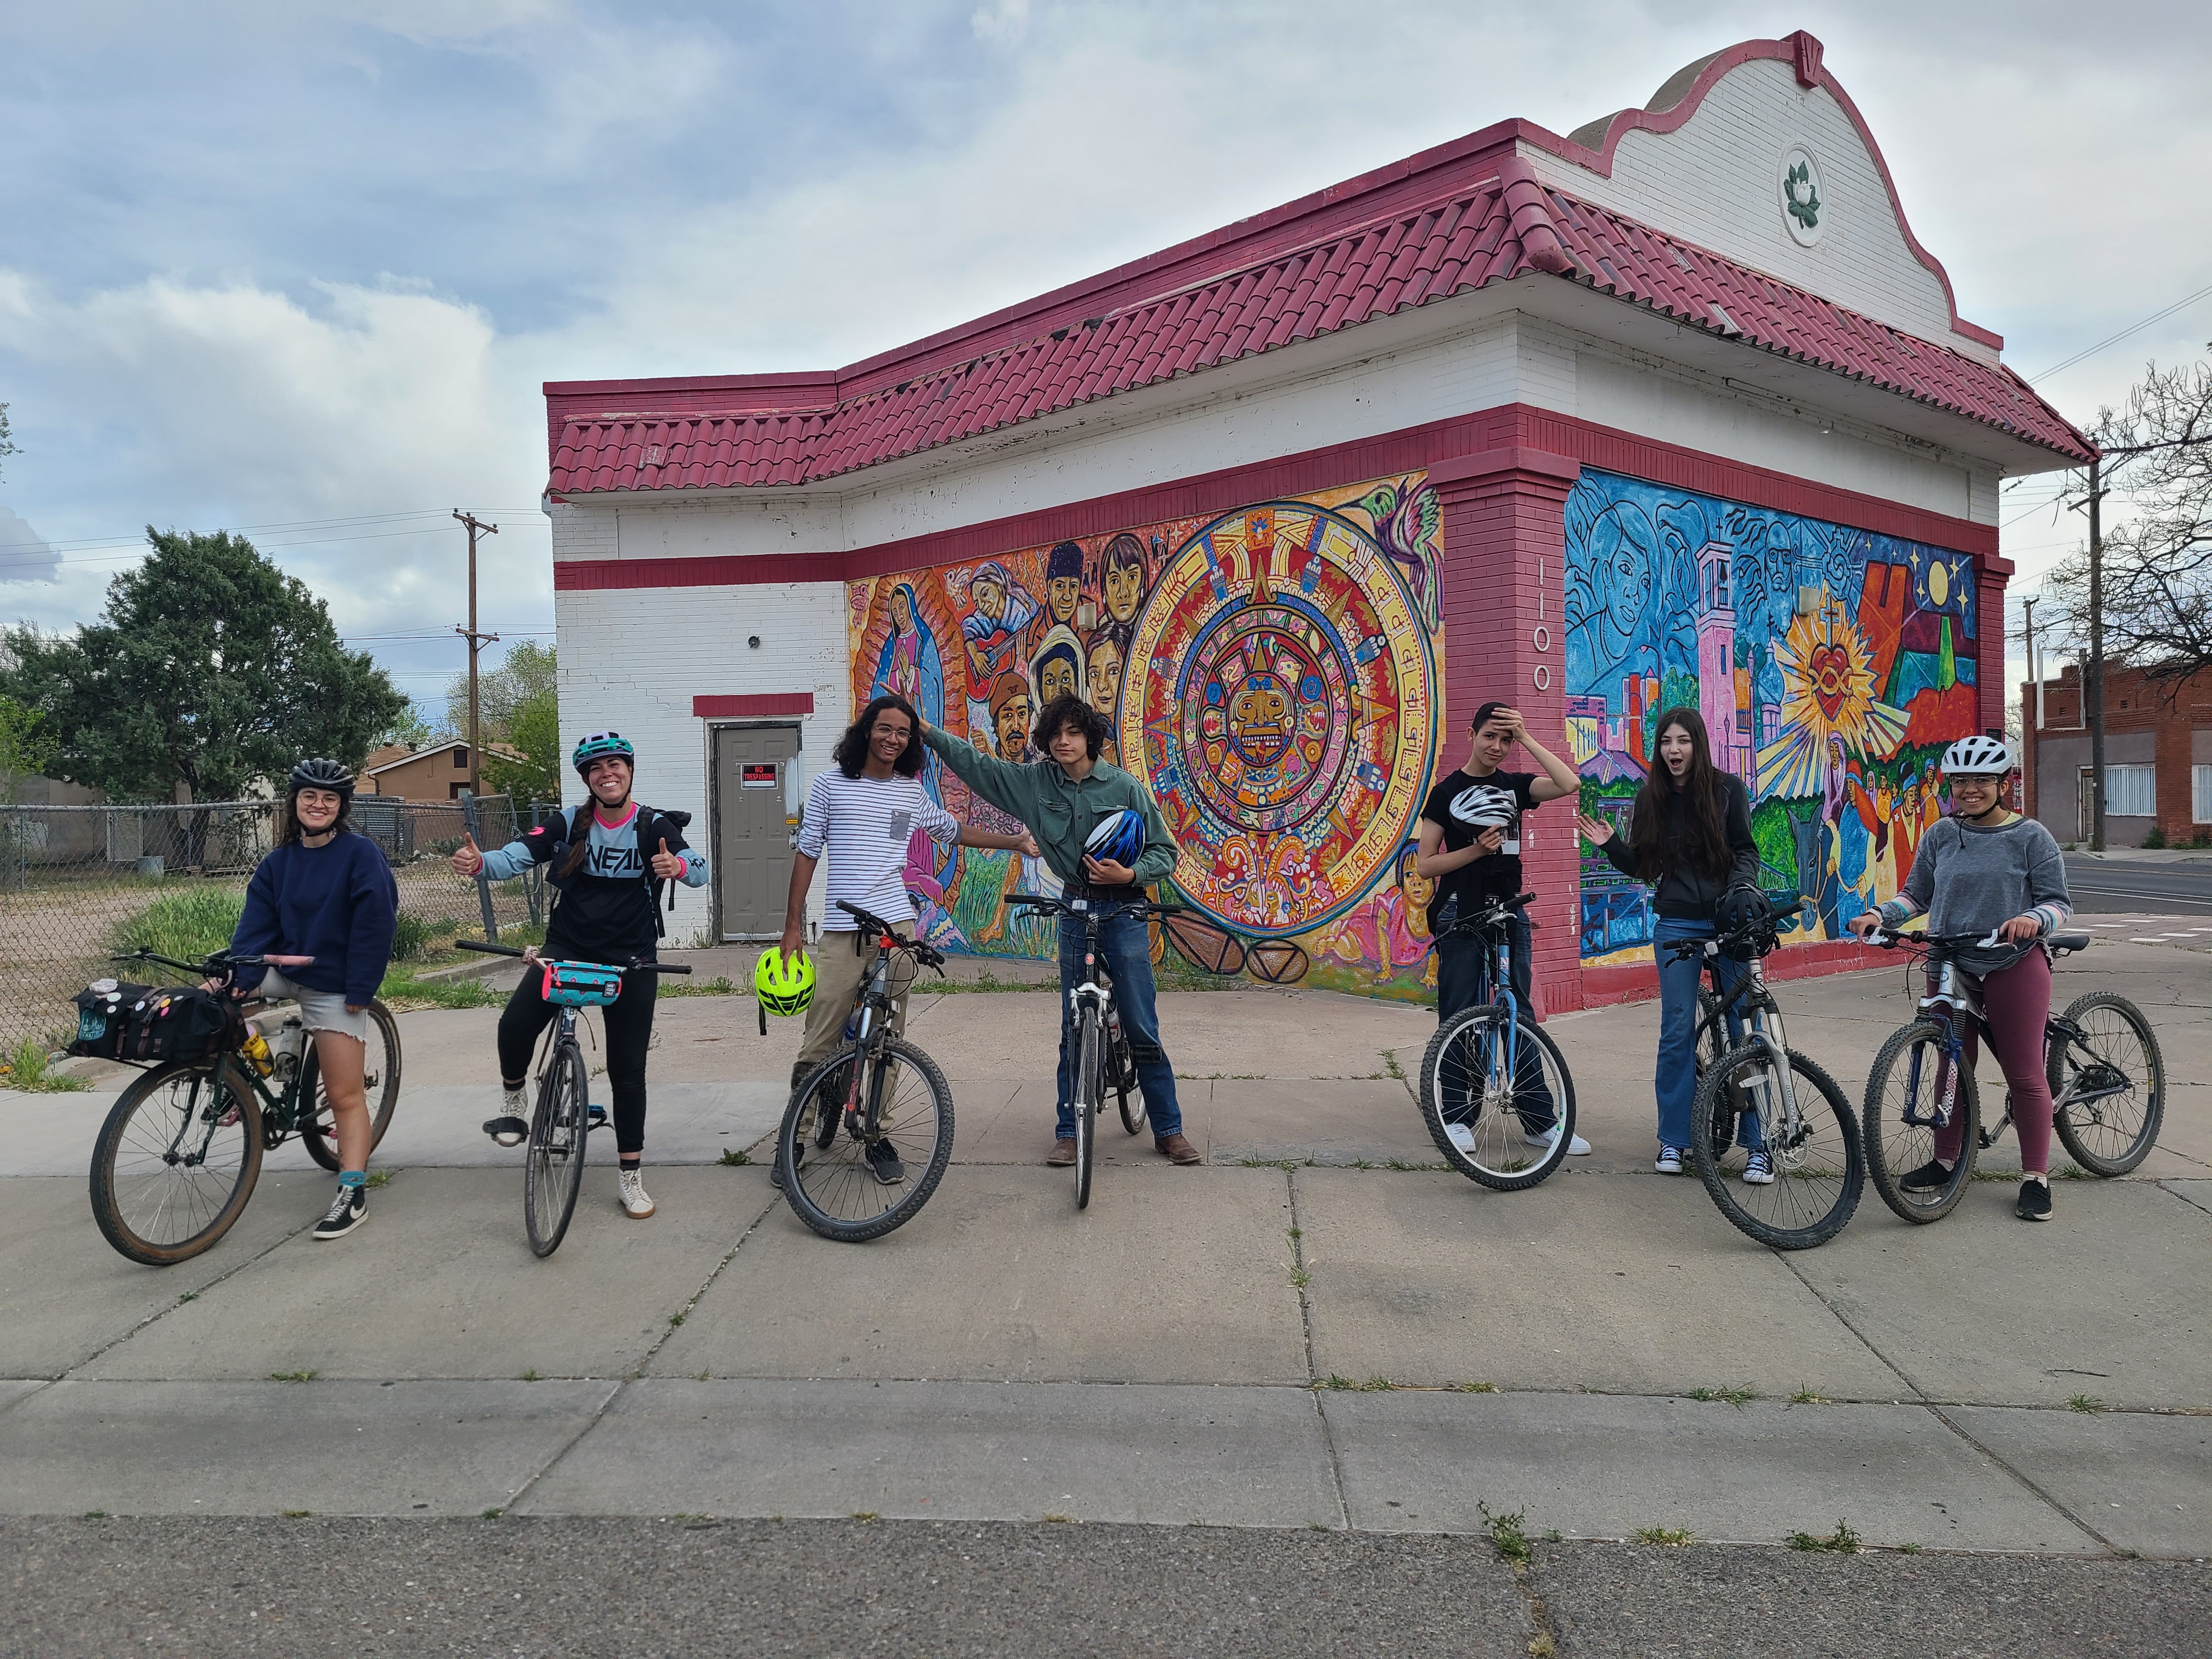 Several young people stand with bikes in front of a brightly painted building, arms in the air